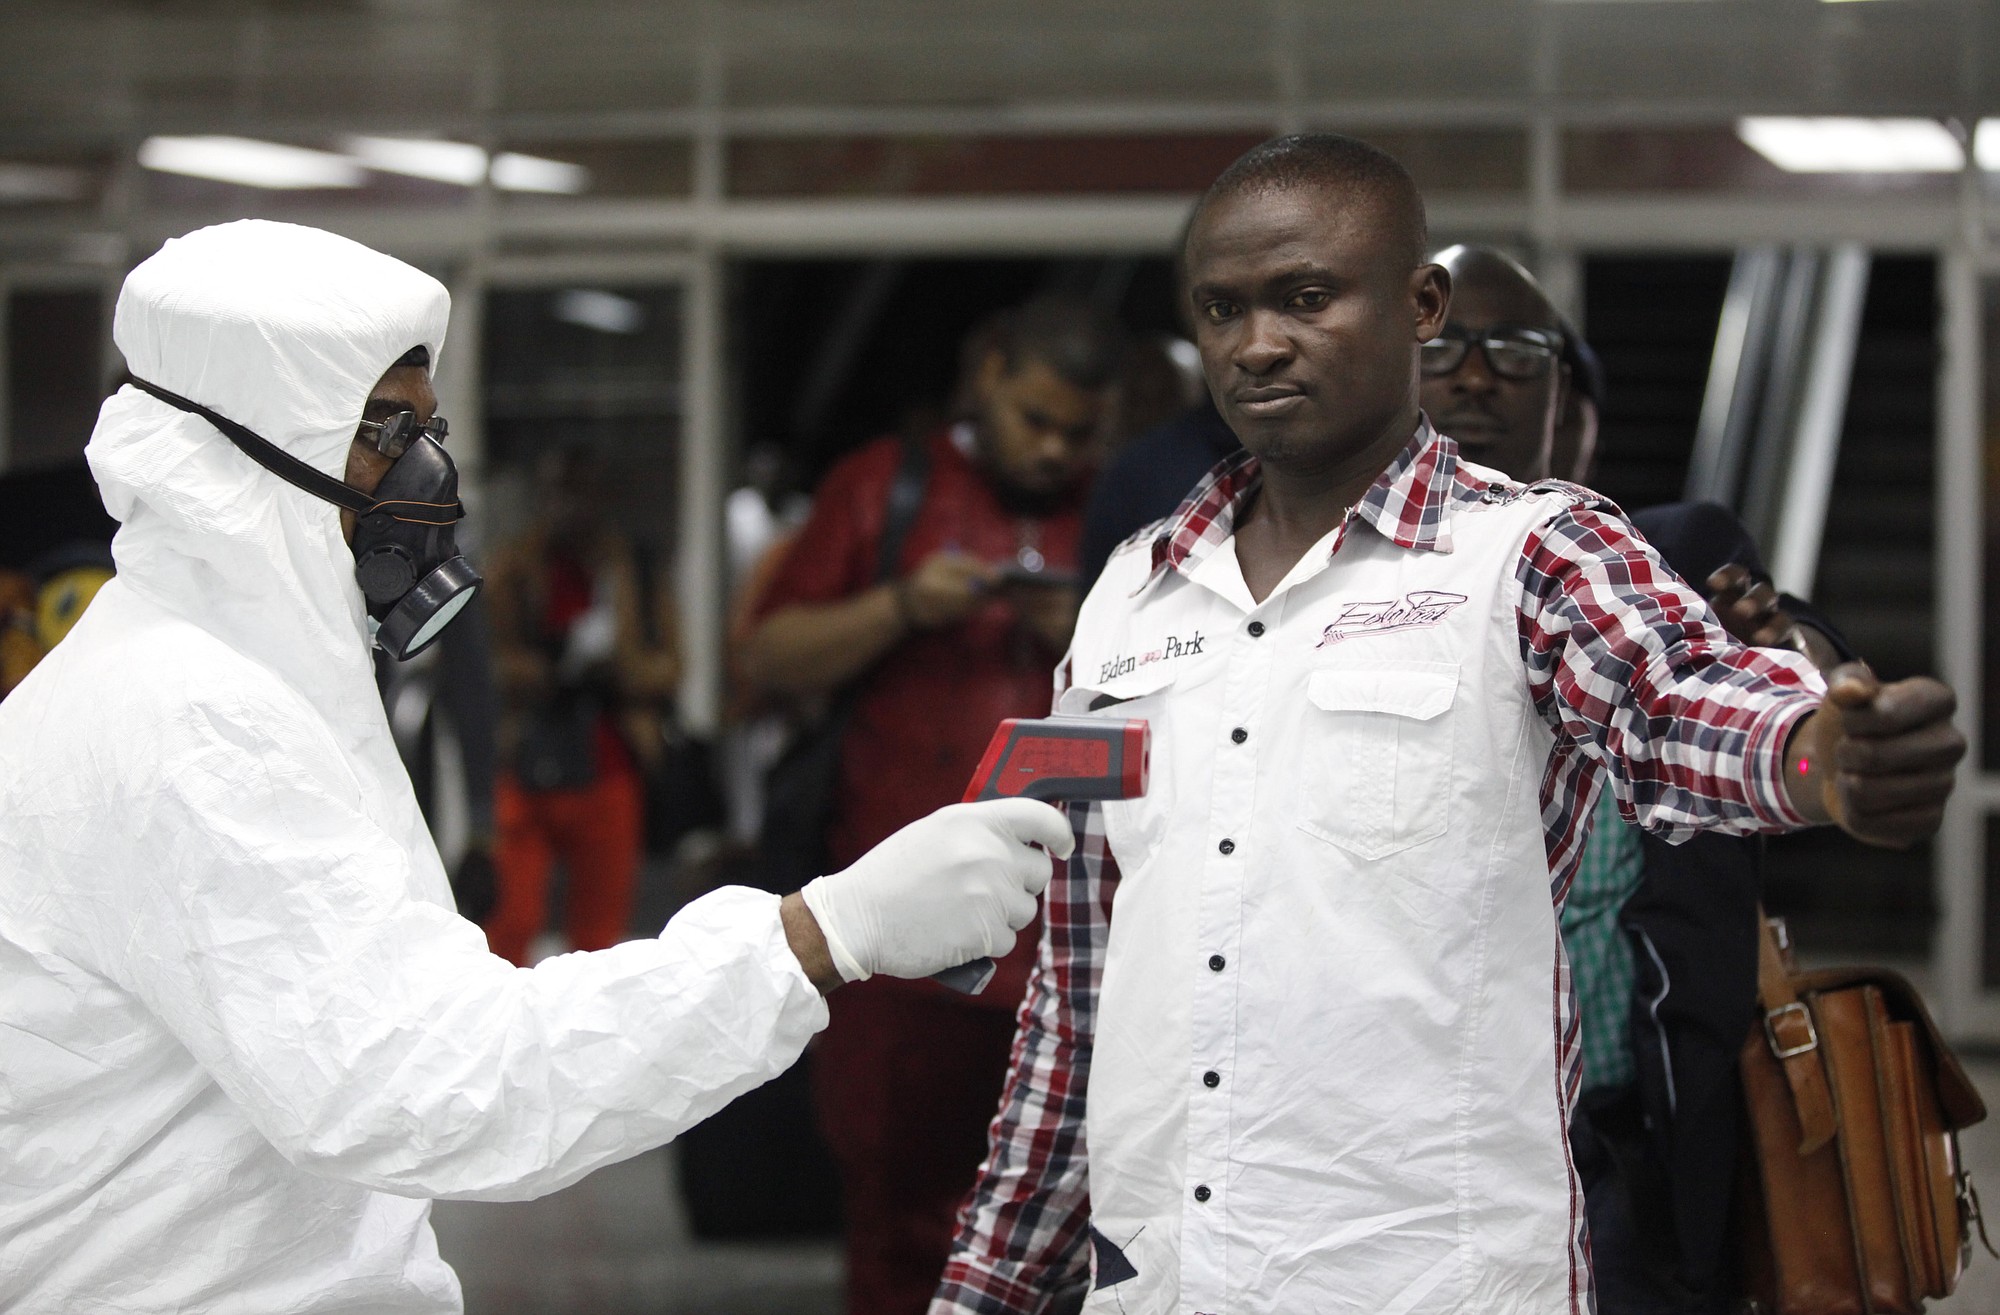 A port health official uses a thermometer to screen a worker Wednesday at Murtala Muhammed International Airport in Lagos, Nigeria.